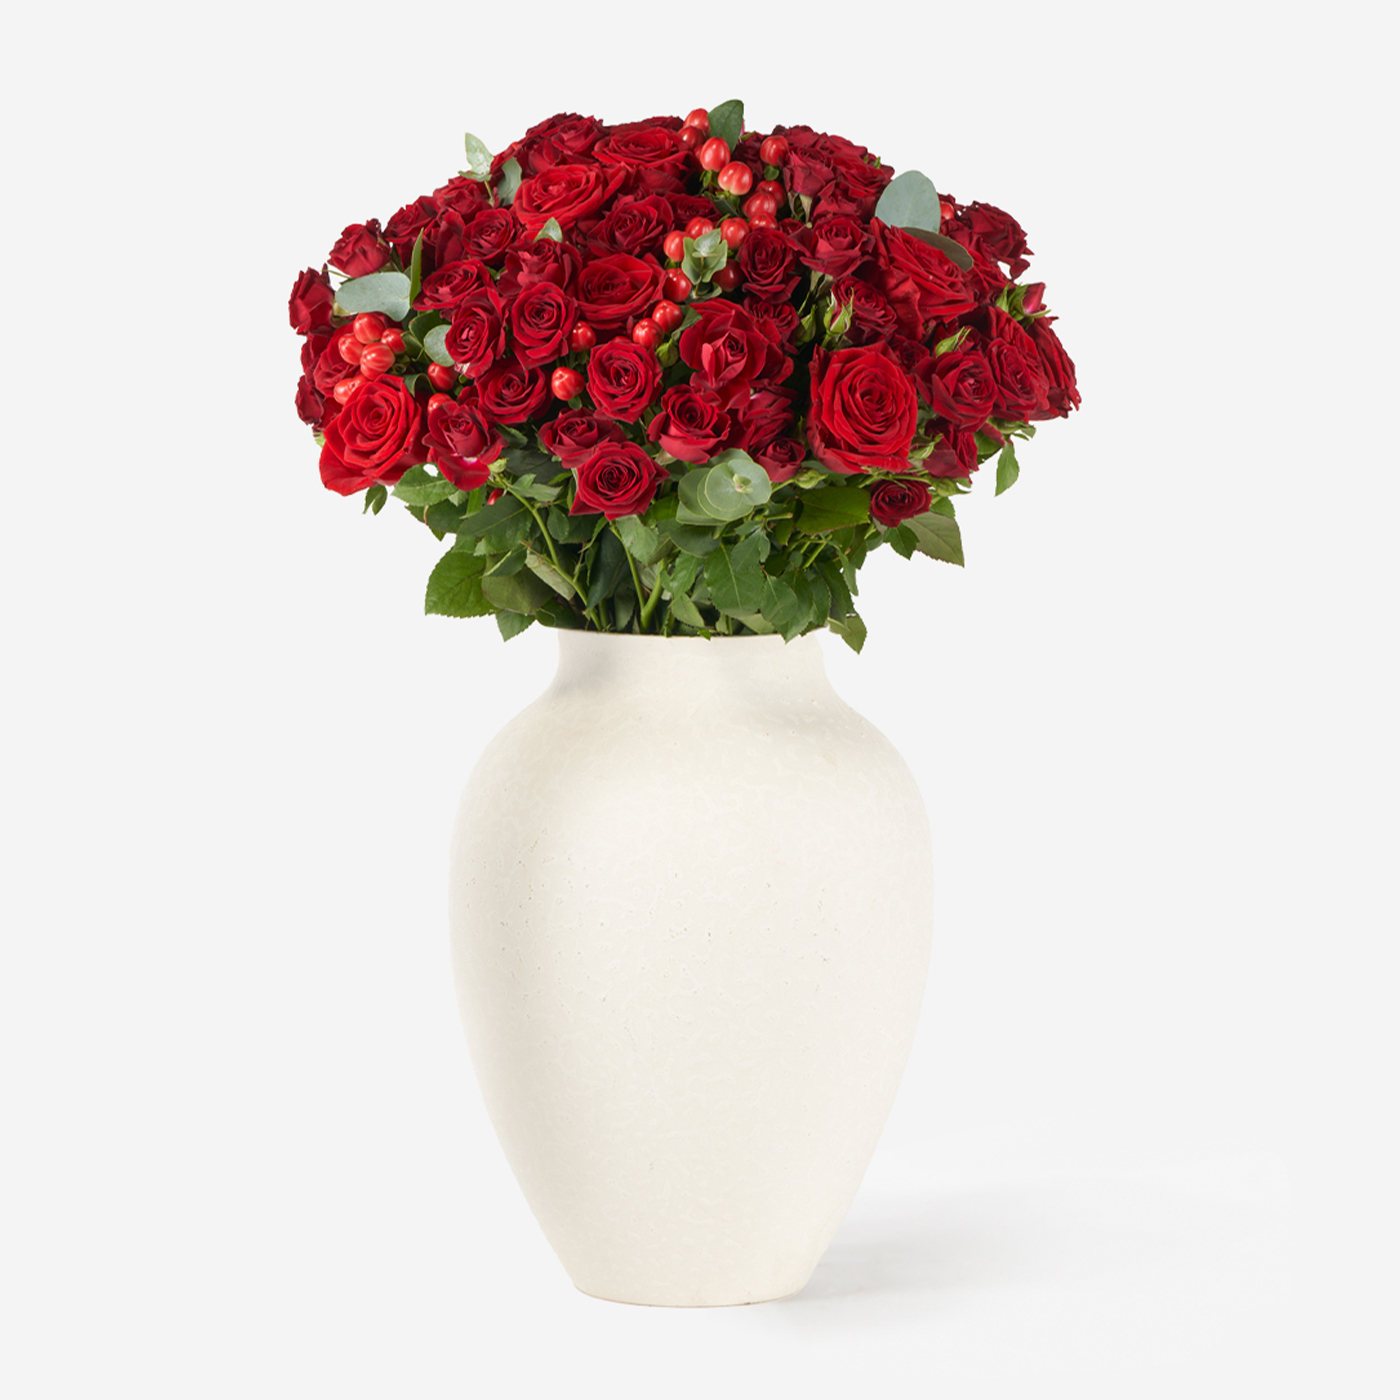 100 Red Roses in a glass vase